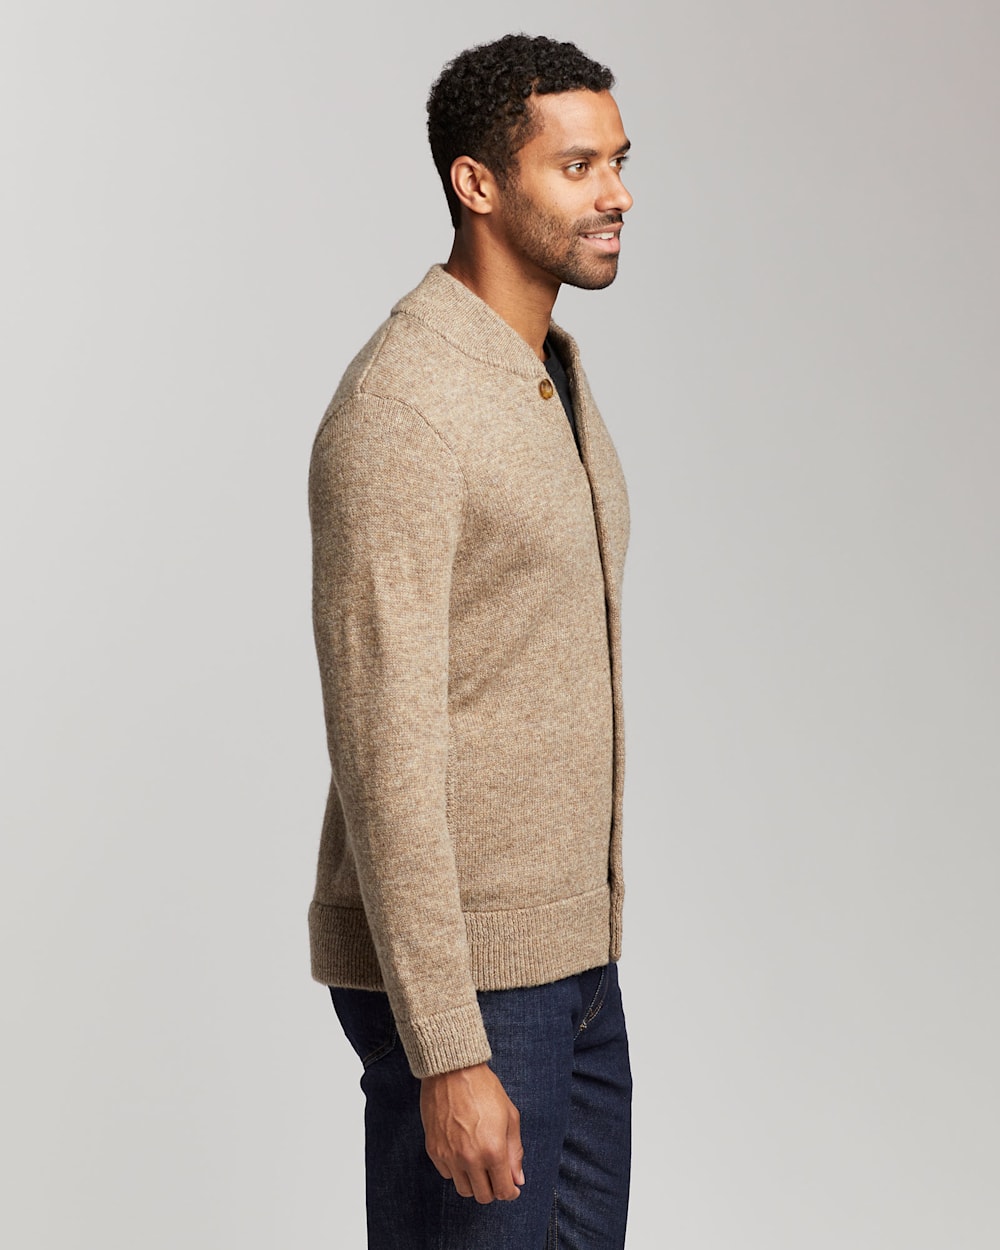 ALTERNATE VIEW OF MEN'S SHETLAND WASHABLE WOOL CARDIGAN IN COYOTE TAN HEATHER image number 2